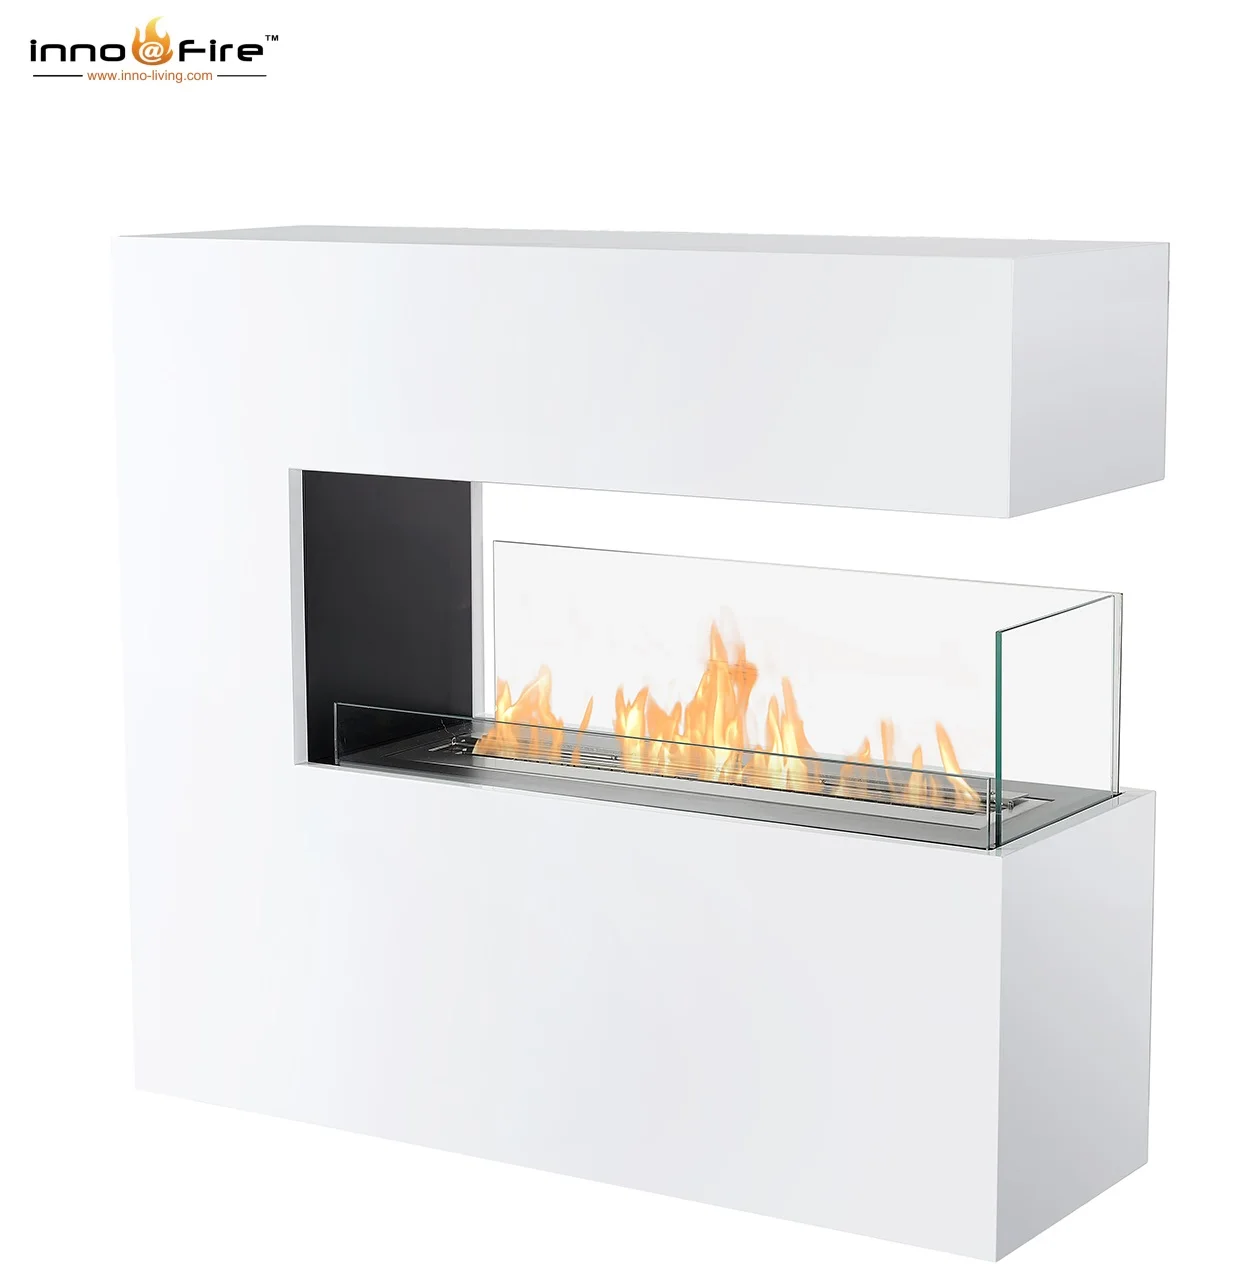 Customized Cheap Bioethanol Fires Suppliers - Good Price - INNO-LIVING